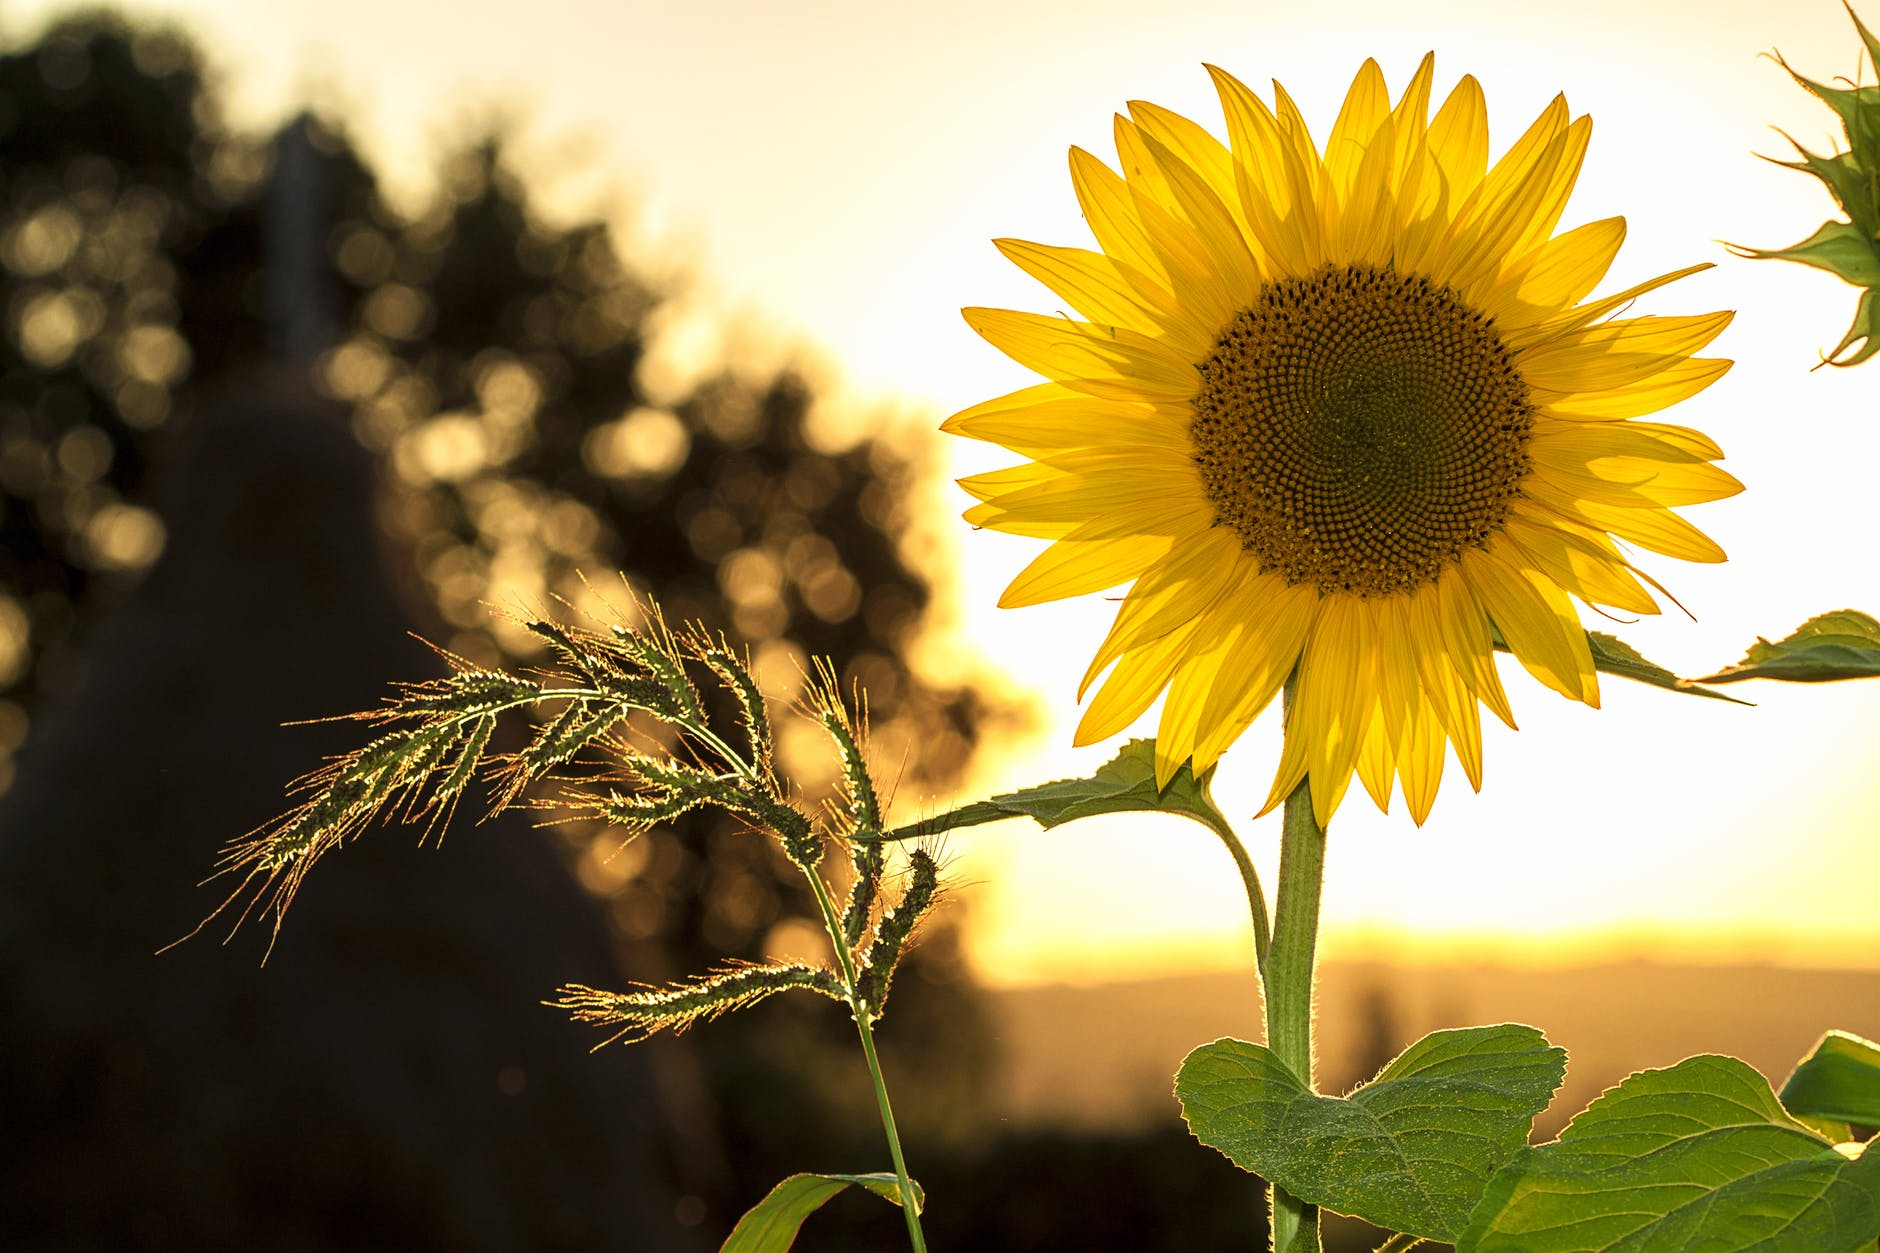 A yellow sunflower as the main focus, a sunset in the background.